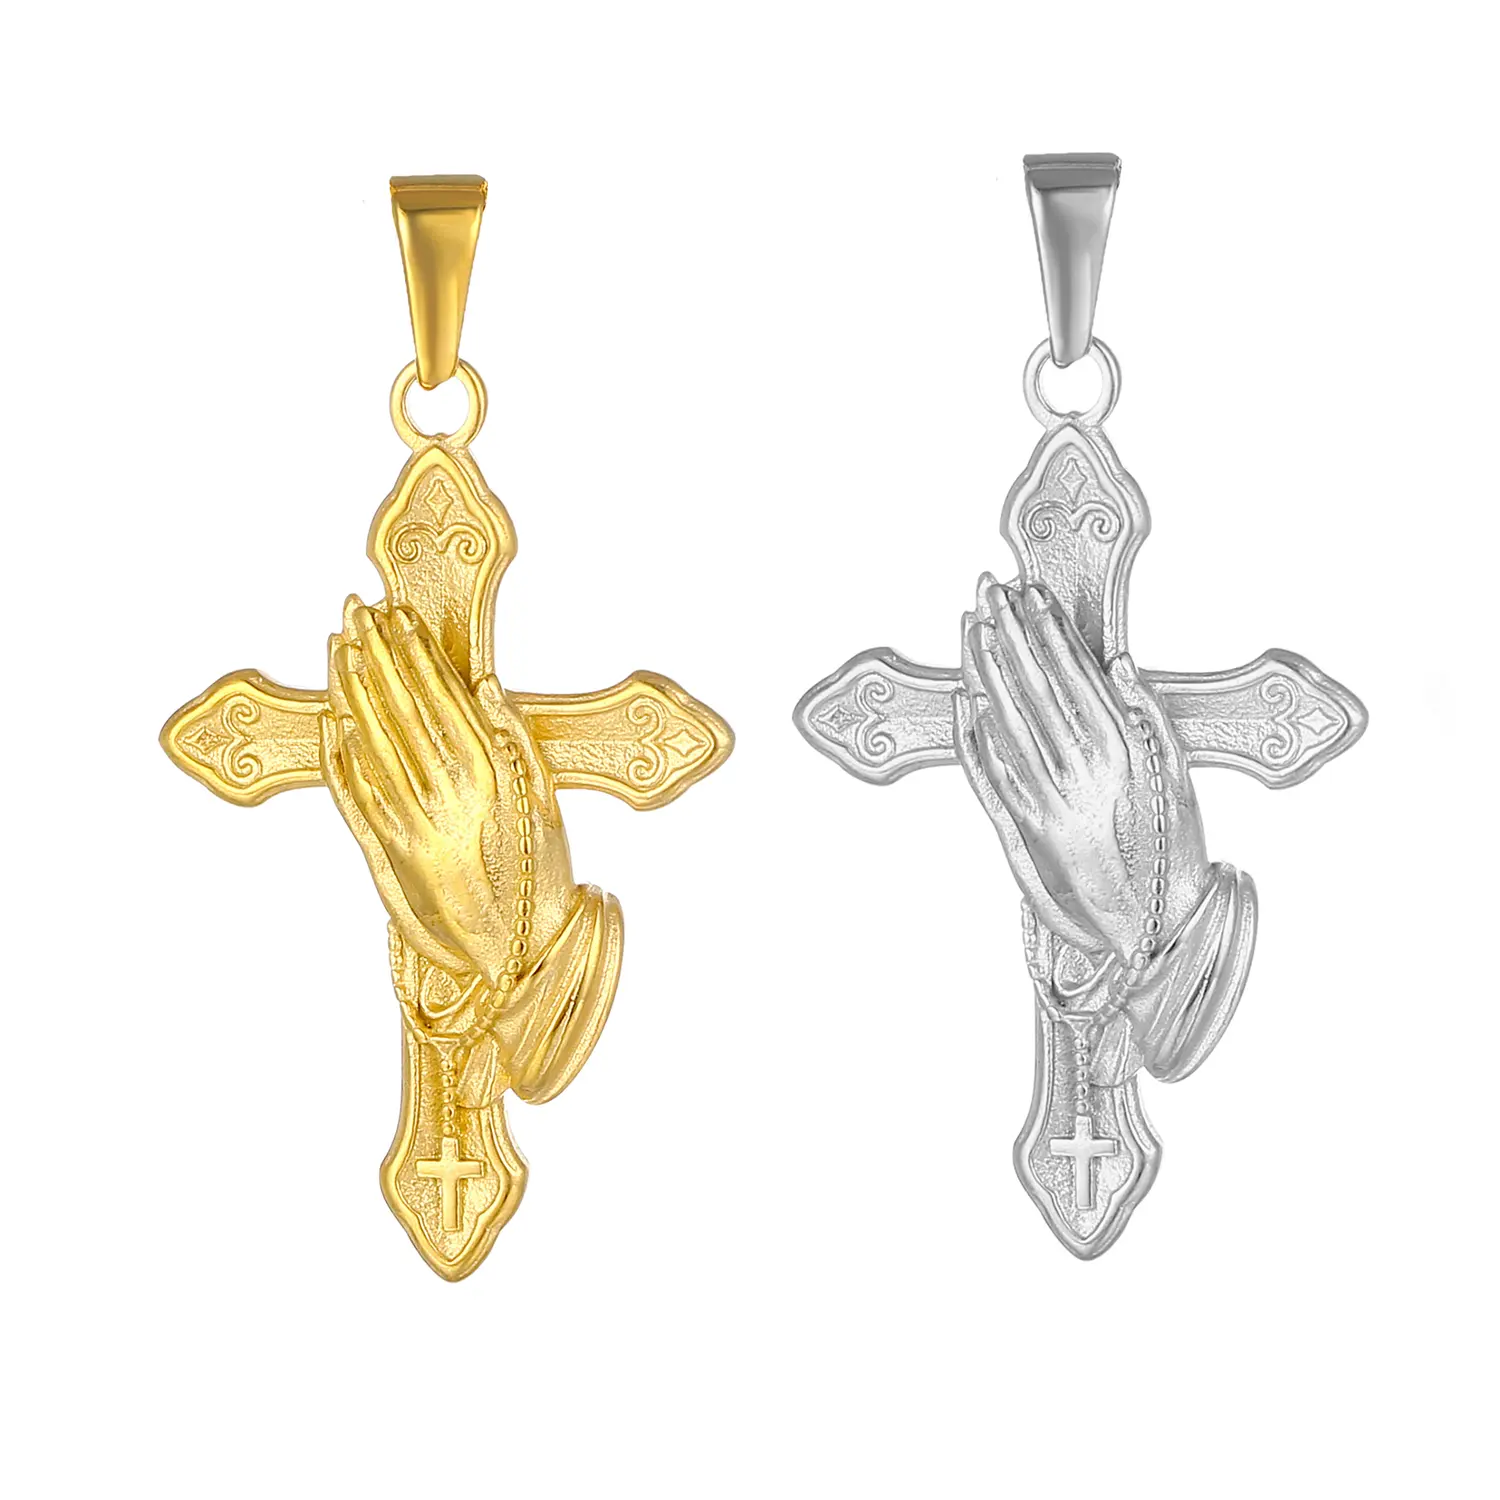 Olivia Stainless Steel Wholesale Religious Pray hand Charm 18K gold plated men women cross Pendant for Jewelry Making